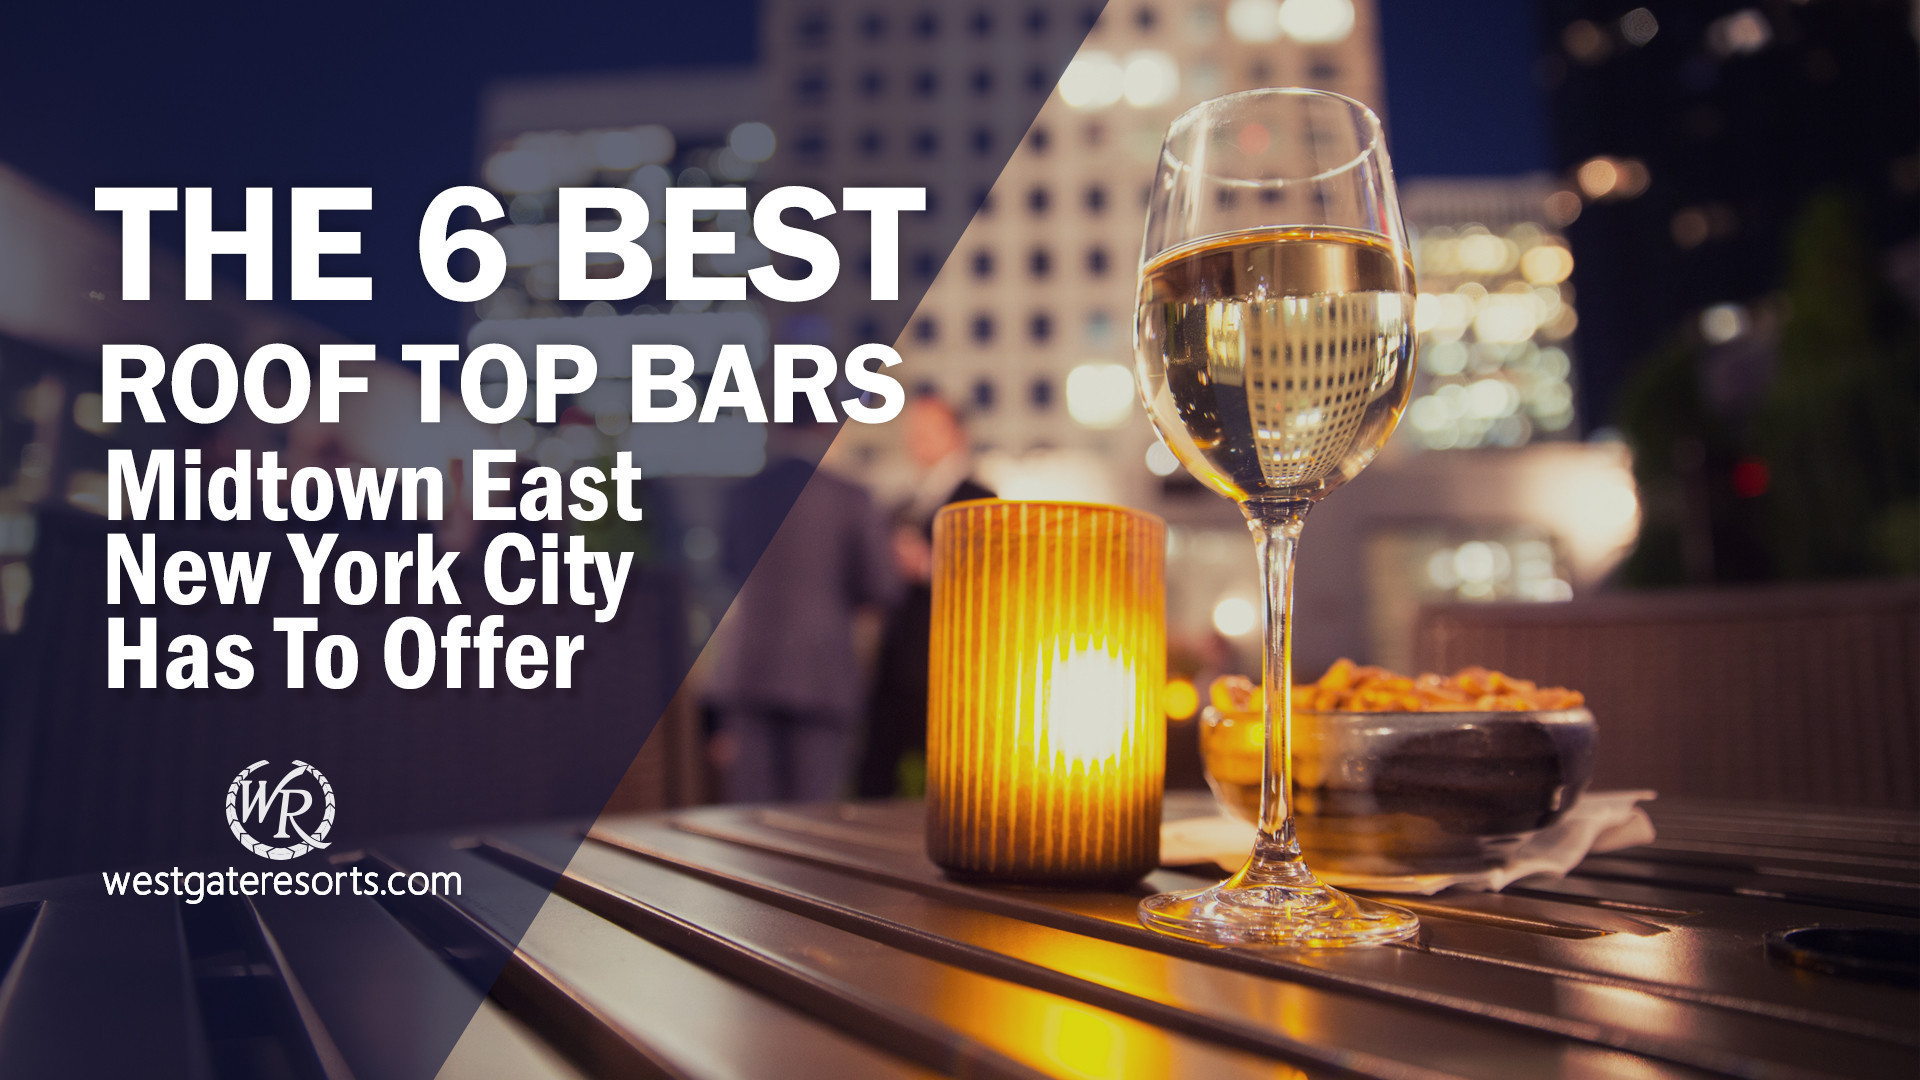 The 6 Best Rooftop Bars Midtown East New York City Has To Offer | Westgate New York City